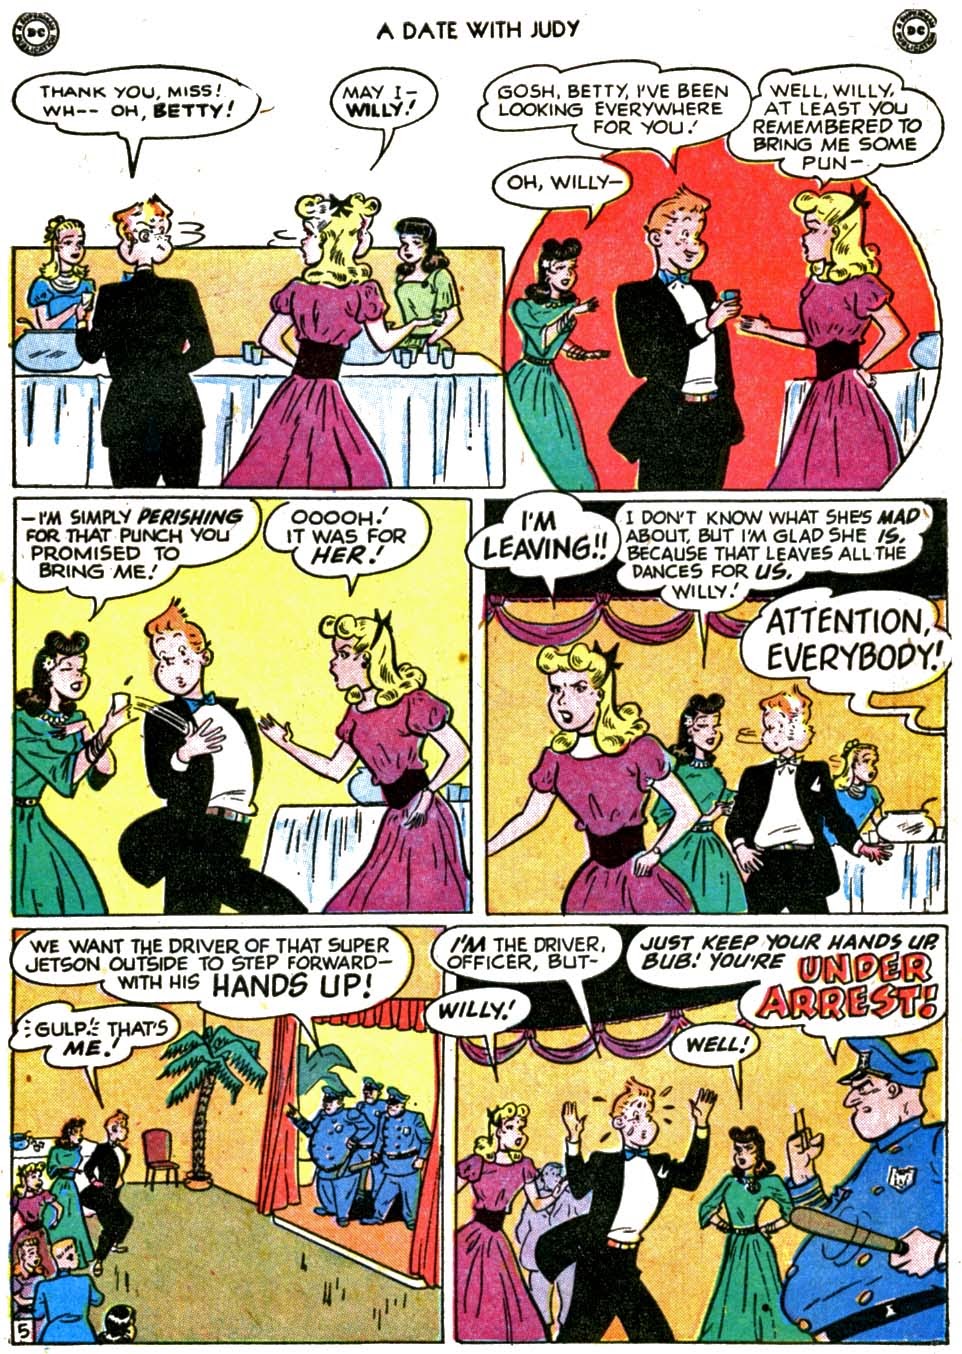 Read online A Date with Judy comic -  Issue #10 - 39